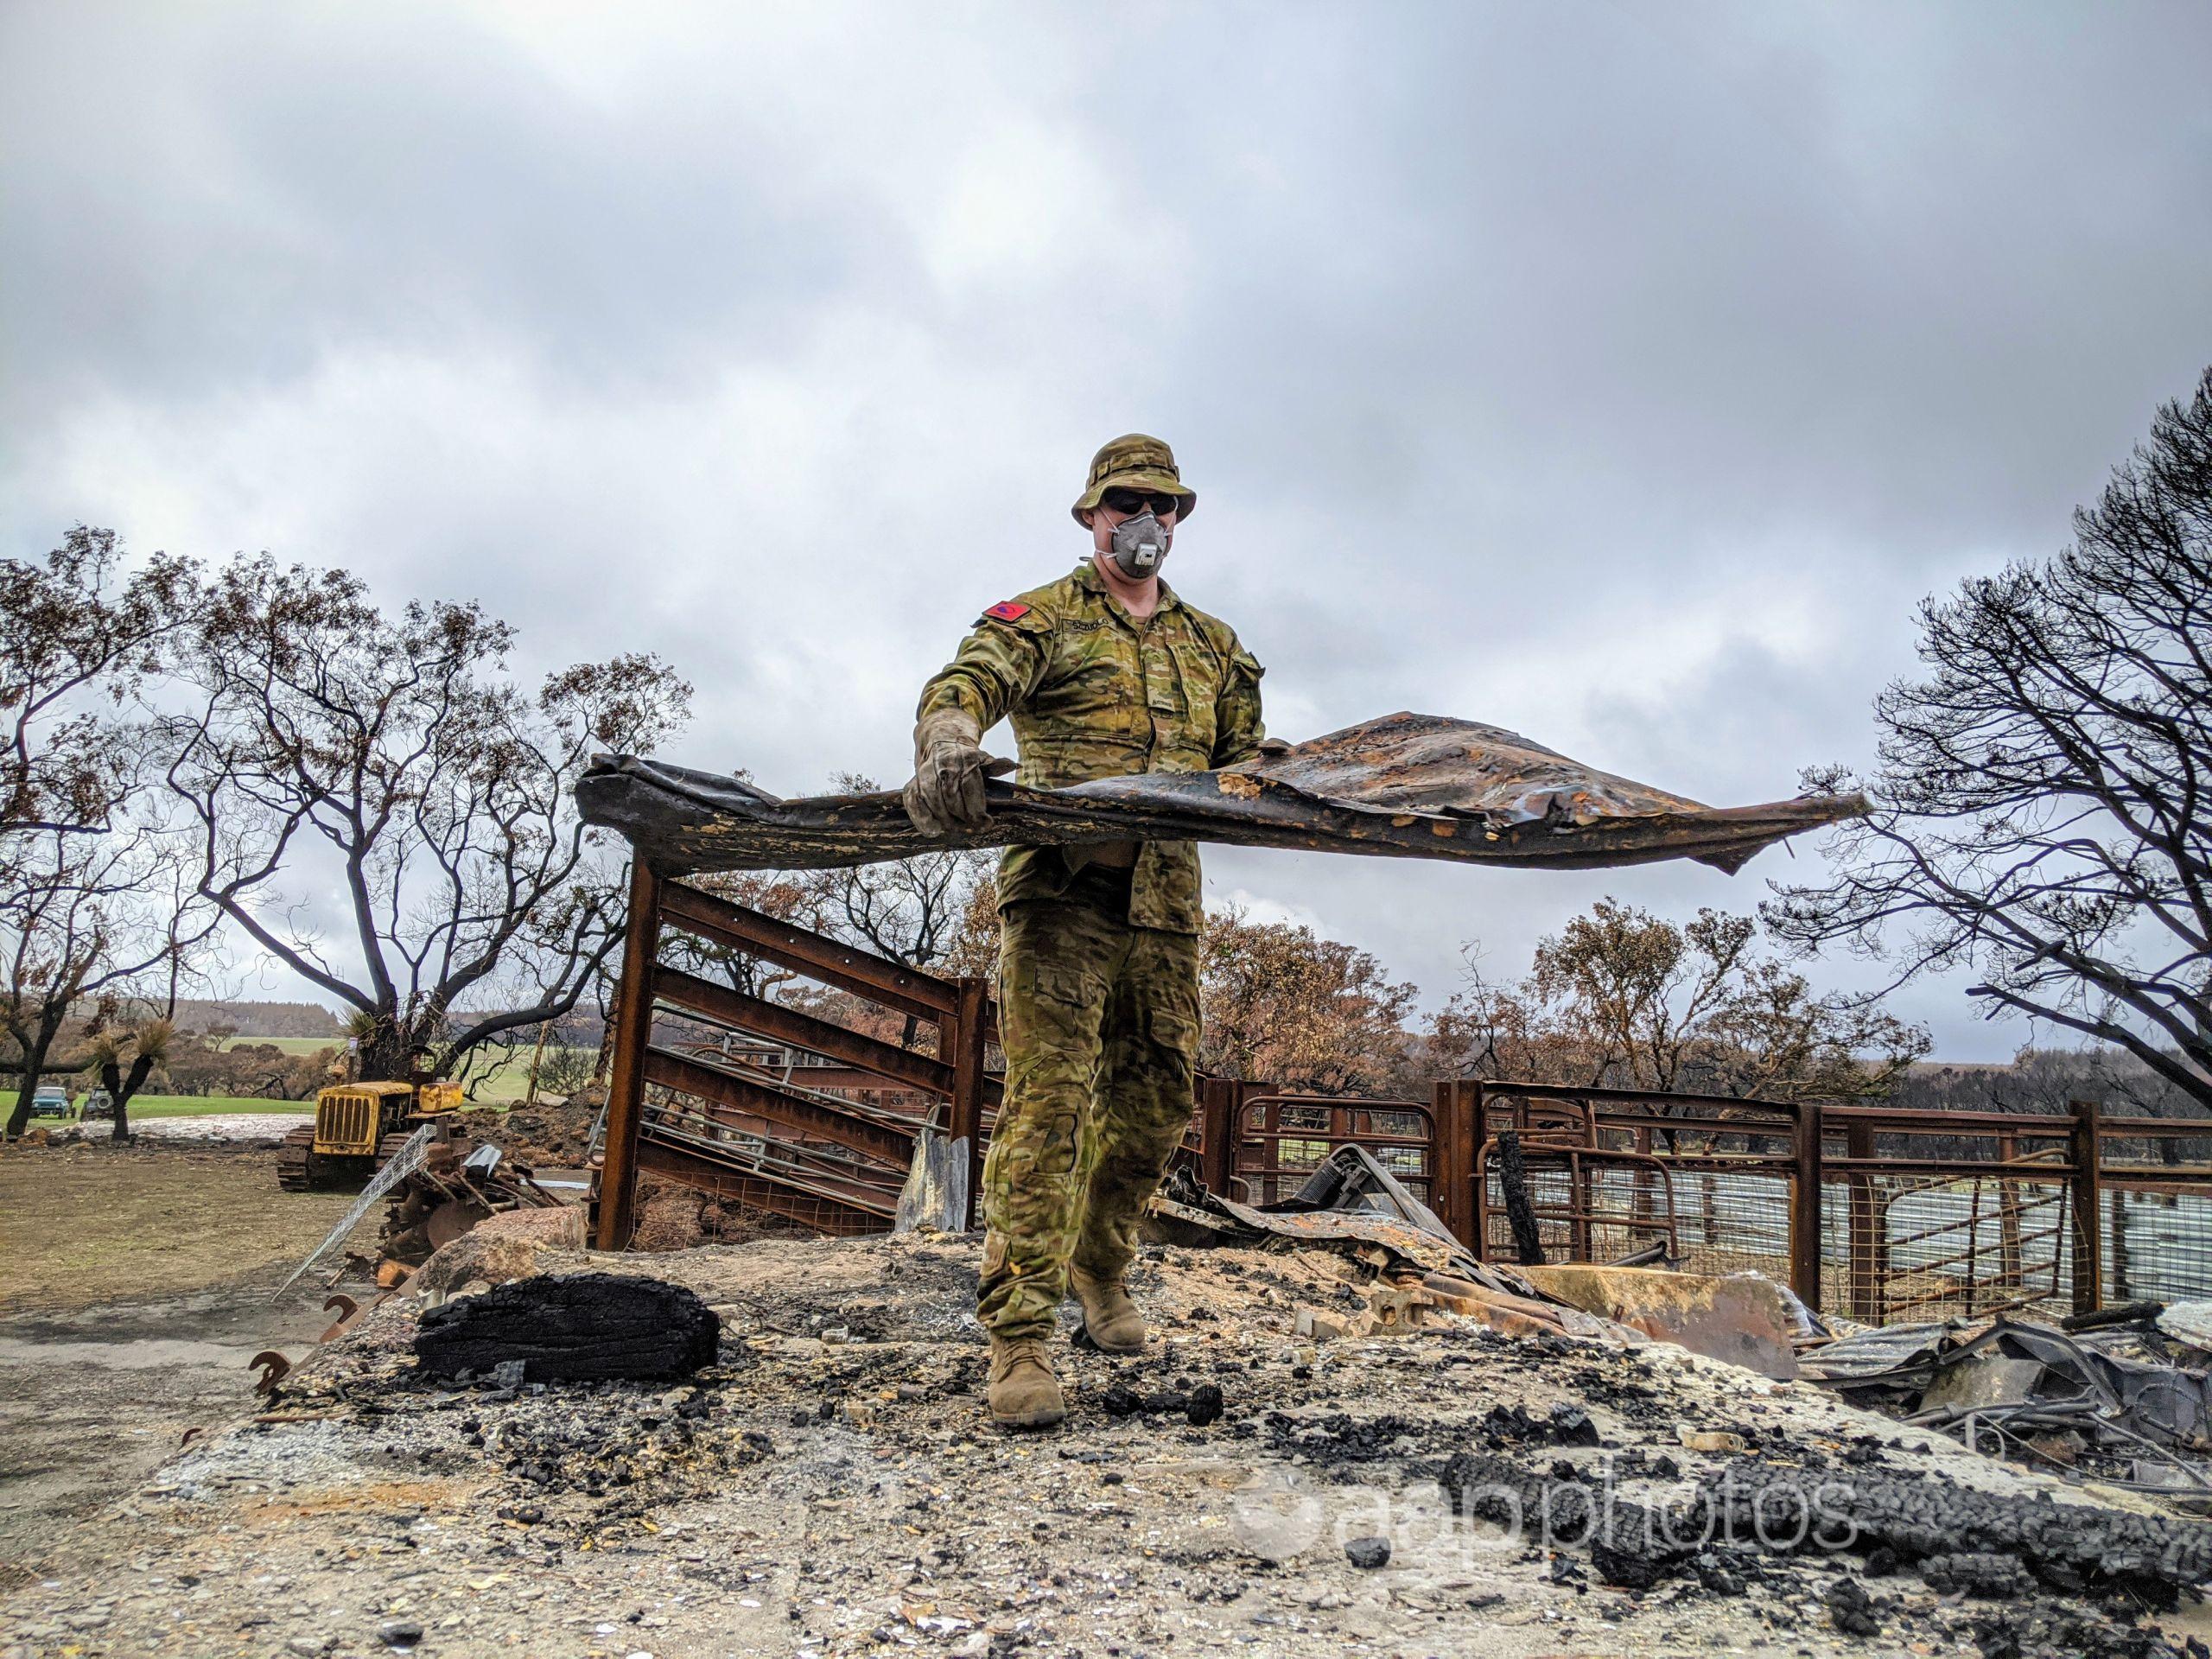 An soldier assisting with a clean-up after fires on Kangaroo Island.